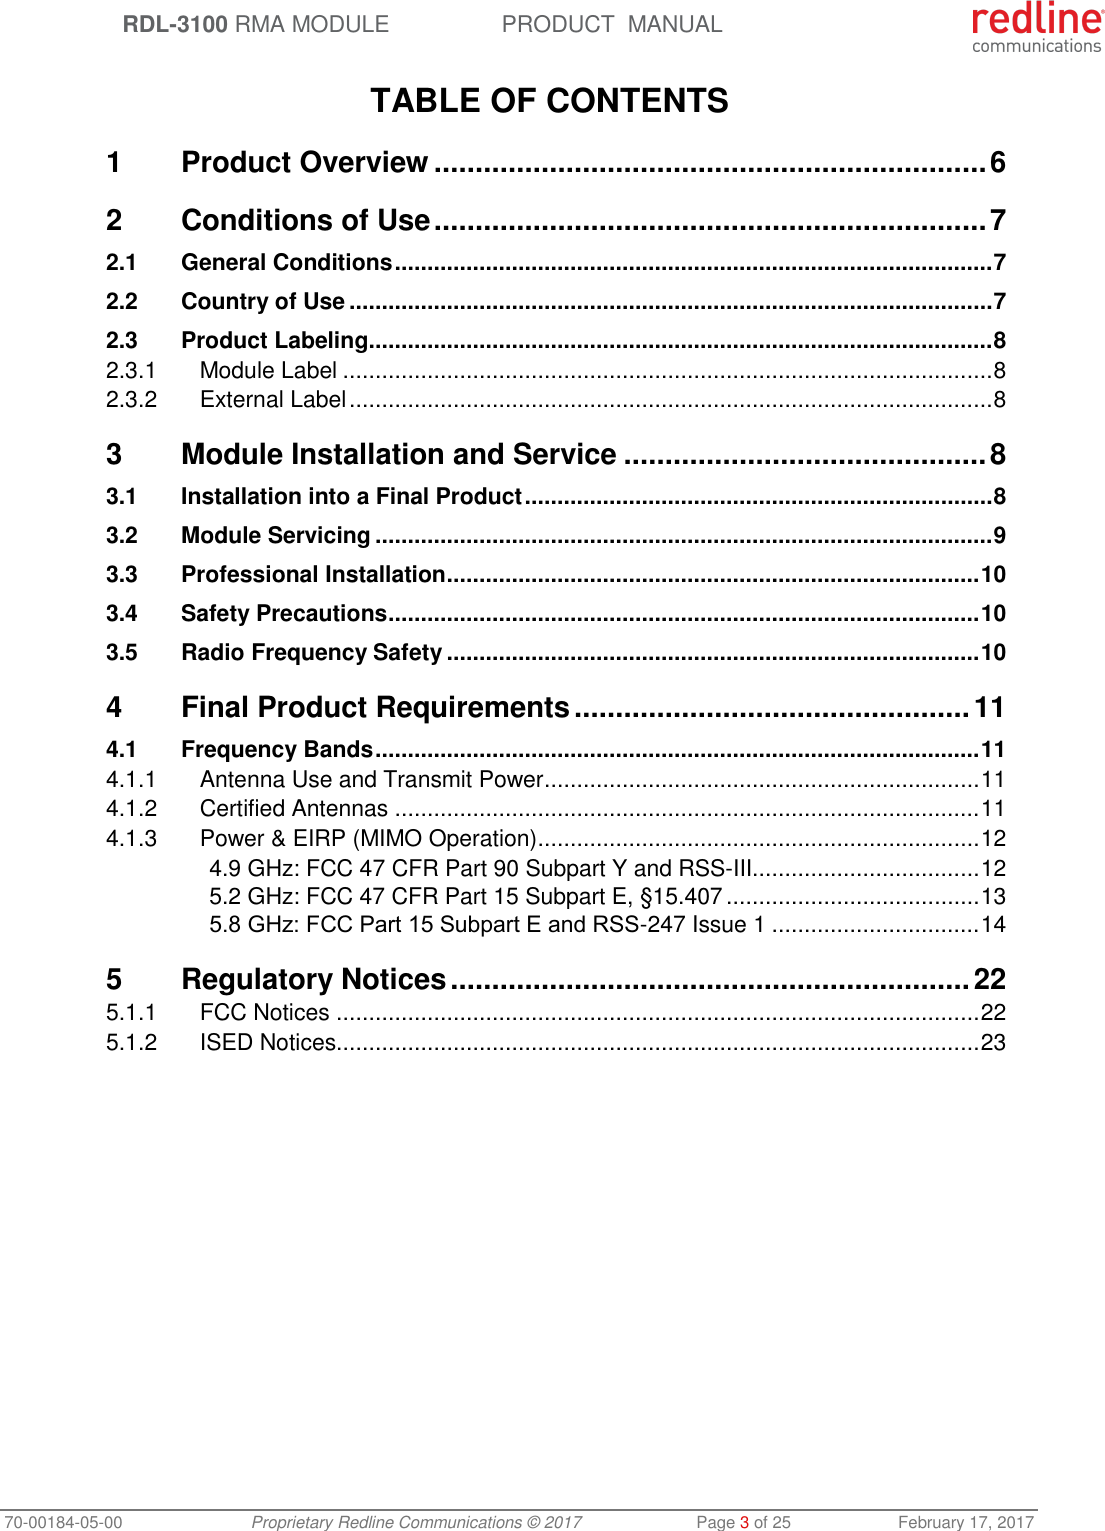  RDL-3100 RMA MODULE PRODUCT  MANUAL 70-00184-05-00 Proprietary Redline Communications © 2017  Page 3 of 25  February 17, 2017  TABLE OF CONTENTS 1 Product Overview ................................................................... 6 2 Conditions of Use ................................................................... 7 2.1 General Conditions ............................................................................................ 7 2.2 Country of Use ................................................................................................... 7 2.3 Product Labeling ................................................................................................ 8 2.3.1 Module Label .................................................................................................... 8 2.3.2 External Label ................................................................................................... 8 3 Module Installation and Service ............................................ 8 3.1 Installation into a Final Product ........................................................................ 8 3.2 Module Servicing ............................................................................................... 9 3.3 Professional Installation .................................................................................. 10 3.4 Safety Precautions ........................................................................................... 10 3.5 Radio Frequency Safety .................................................................................. 10 4 Final Product Requirements ................................................ 11 4.1 Frequency Bands ............................................................................................. 11 4.1.1 Antenna Use and Transmit Power ................................................................... 11 4.1.2 Certified Antennas .......................................................................................... 11 4.1.3 Power &amp; EIRP (MIMO Operation) .................................................................... 12 4.9 GHz: FCC 47 CFR Part 90 Subpart Y and RSS-III................................... 12 5.2 GHz: FCC 47 CFR Part 15 Subpart E, §15.407 ....................................... 13 5.8 GHz: FCC Part 15 Subpart Е and RSS-247 Issue 1 ................................ 14 5 Regulatory Notices ............................................................... 22 5.1.1 FCC Notices ................................................................................................... 22 5.1.2 ISED Notices................................................................................................... 23  